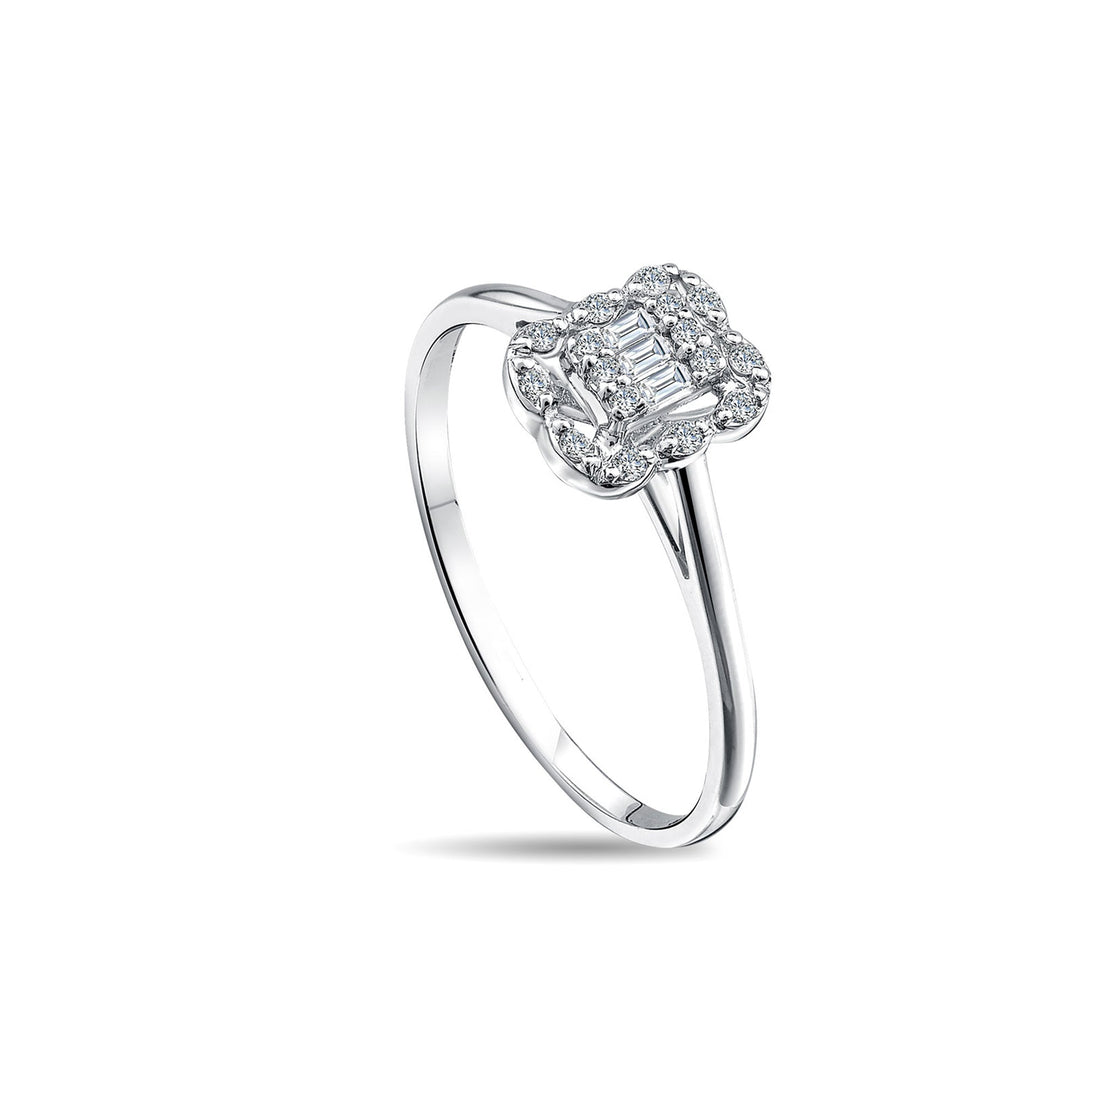 8K Gold Baguette and Round Diamond Ring Shop online from Artisan Brands